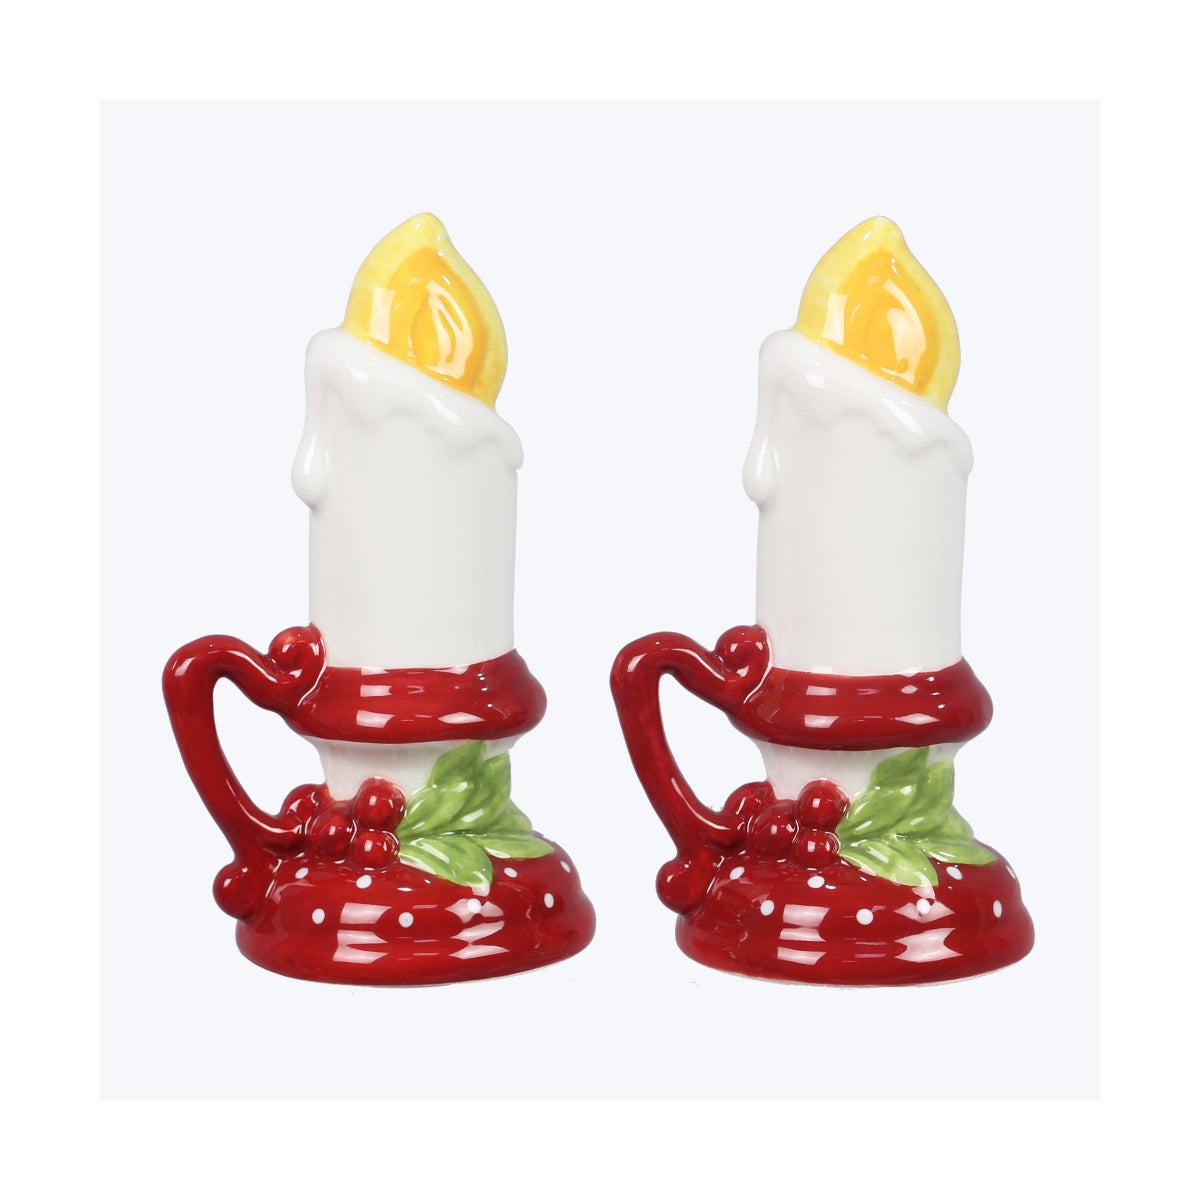 Ceramic Colorful Christmas Candle Stick Salt and Pepper Set. S/P